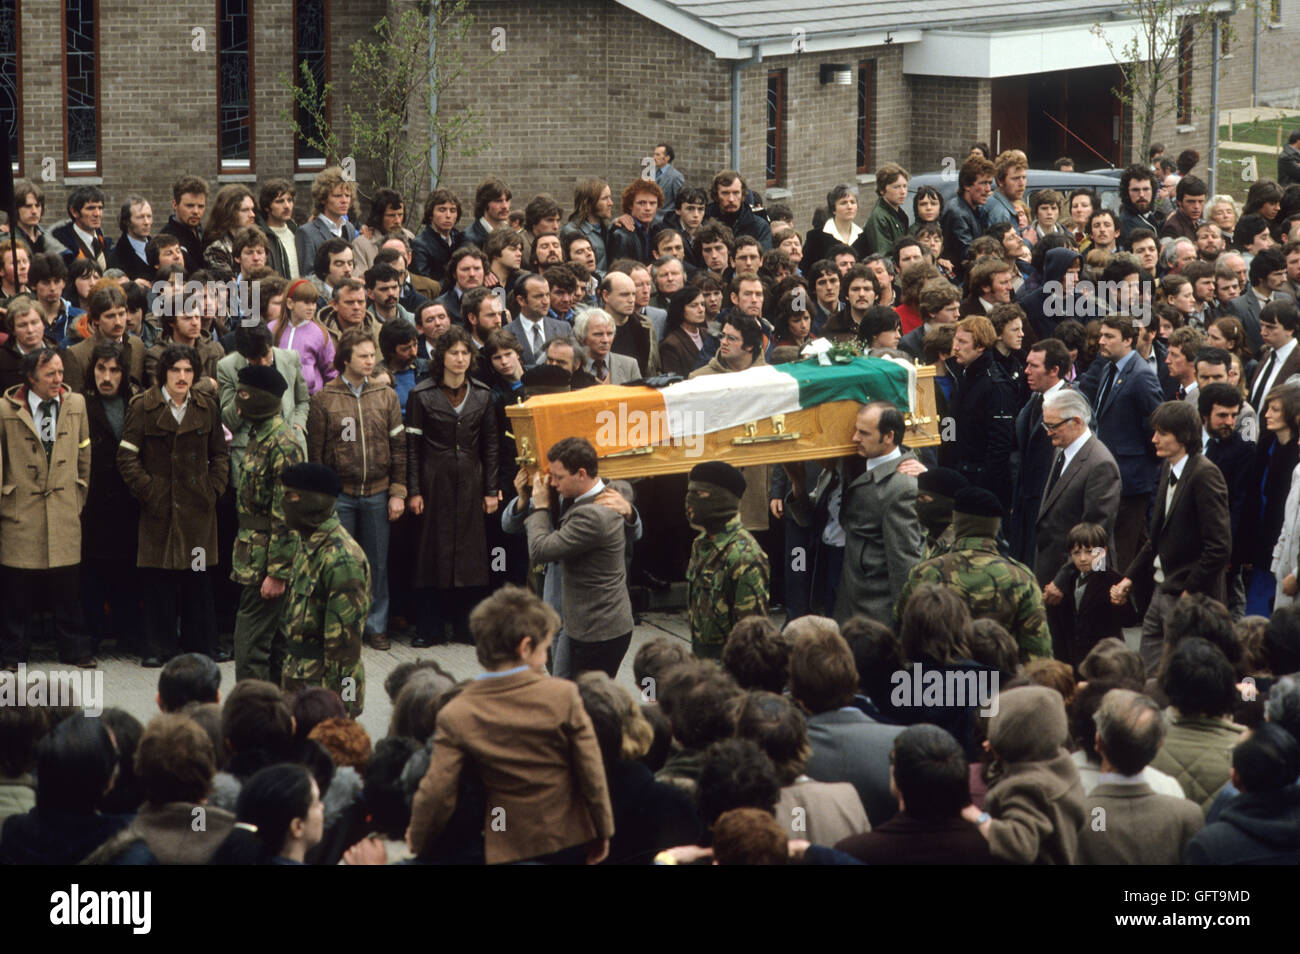 Bobby Sands funeral 1981 The Troubles Northern Ireland 1980s.  Paramilitary IRA soldiers carry coffin. UK 1980s HOMER SYKES Stock Photo